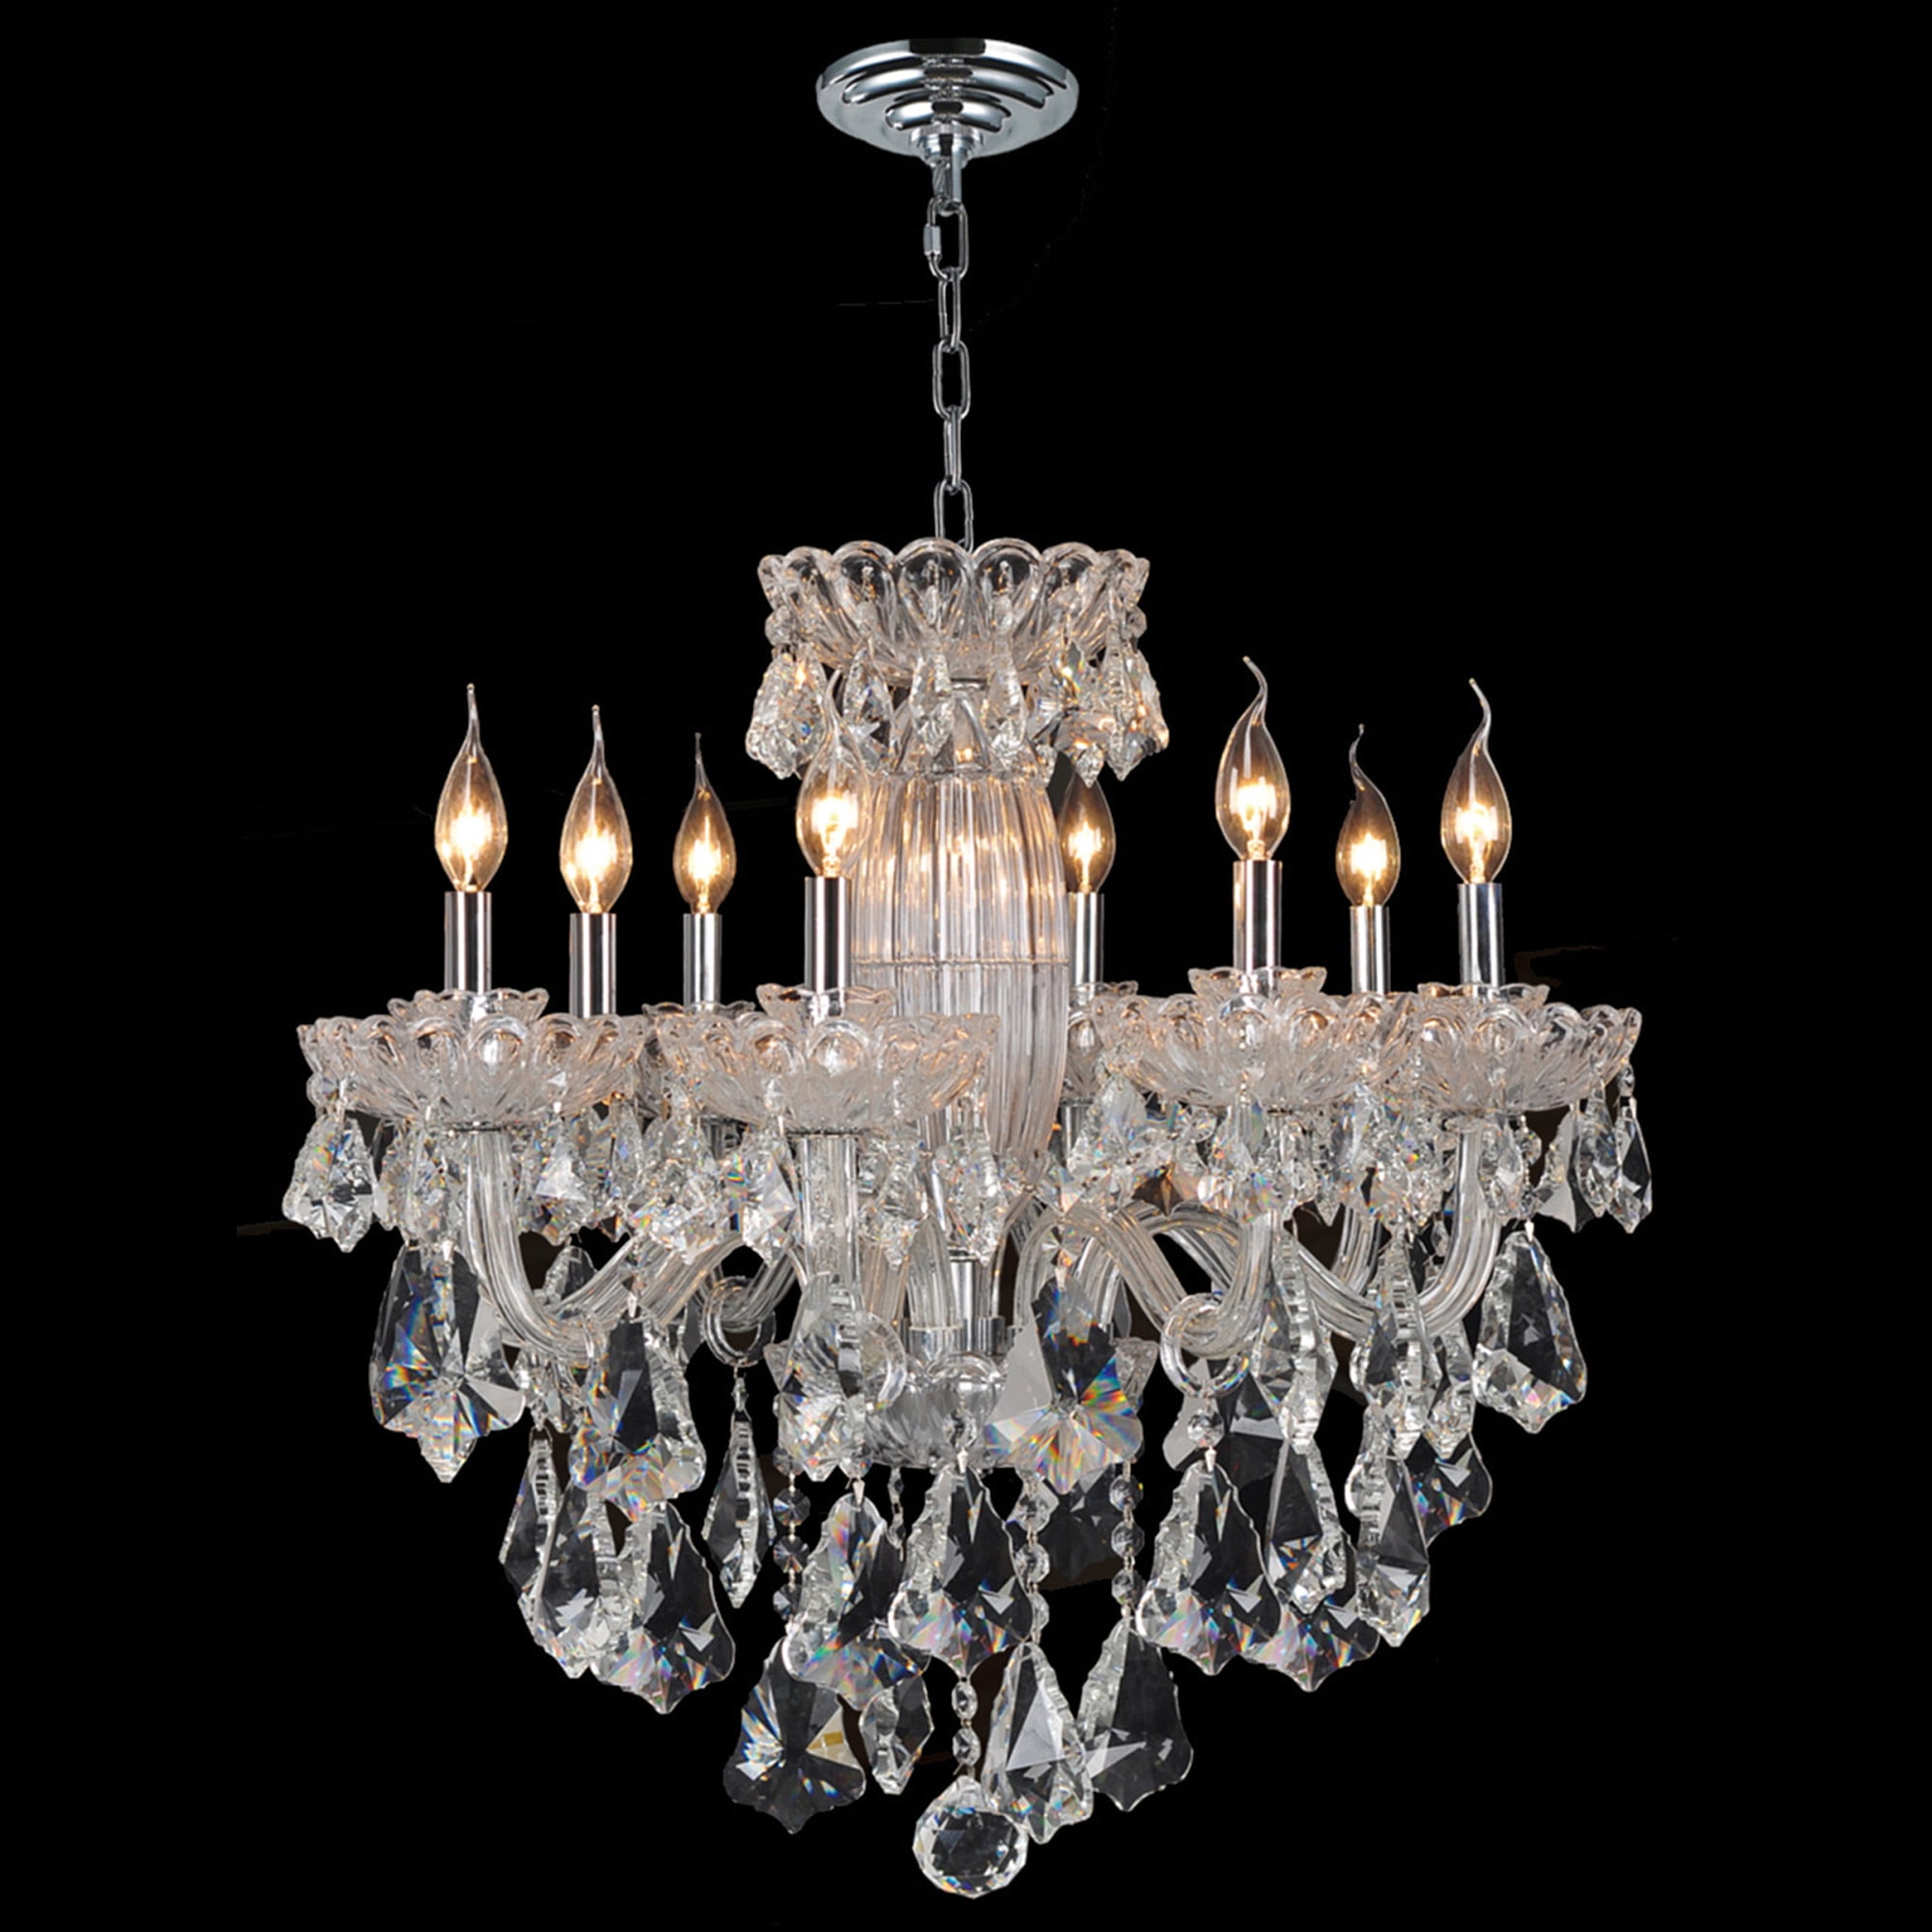 Olde World Collection 8 Light Chrome Finish Crystal Chandelier 25" D x 25" H Large